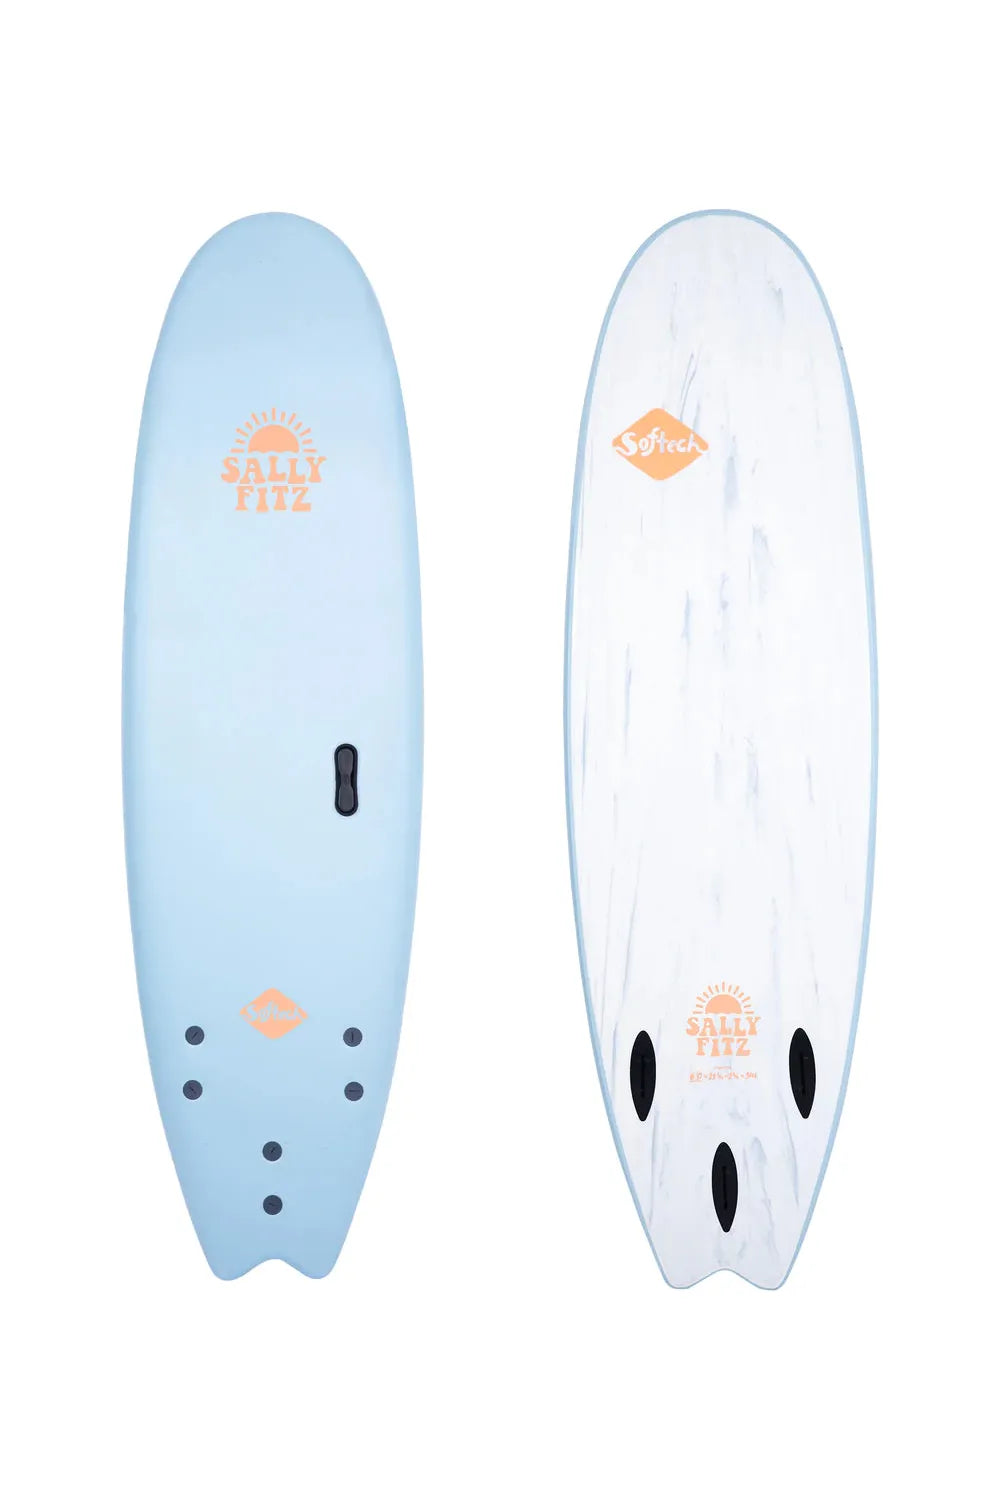 Softech Handshaped Sally Fitzgibbons Fb 6'6 Mist